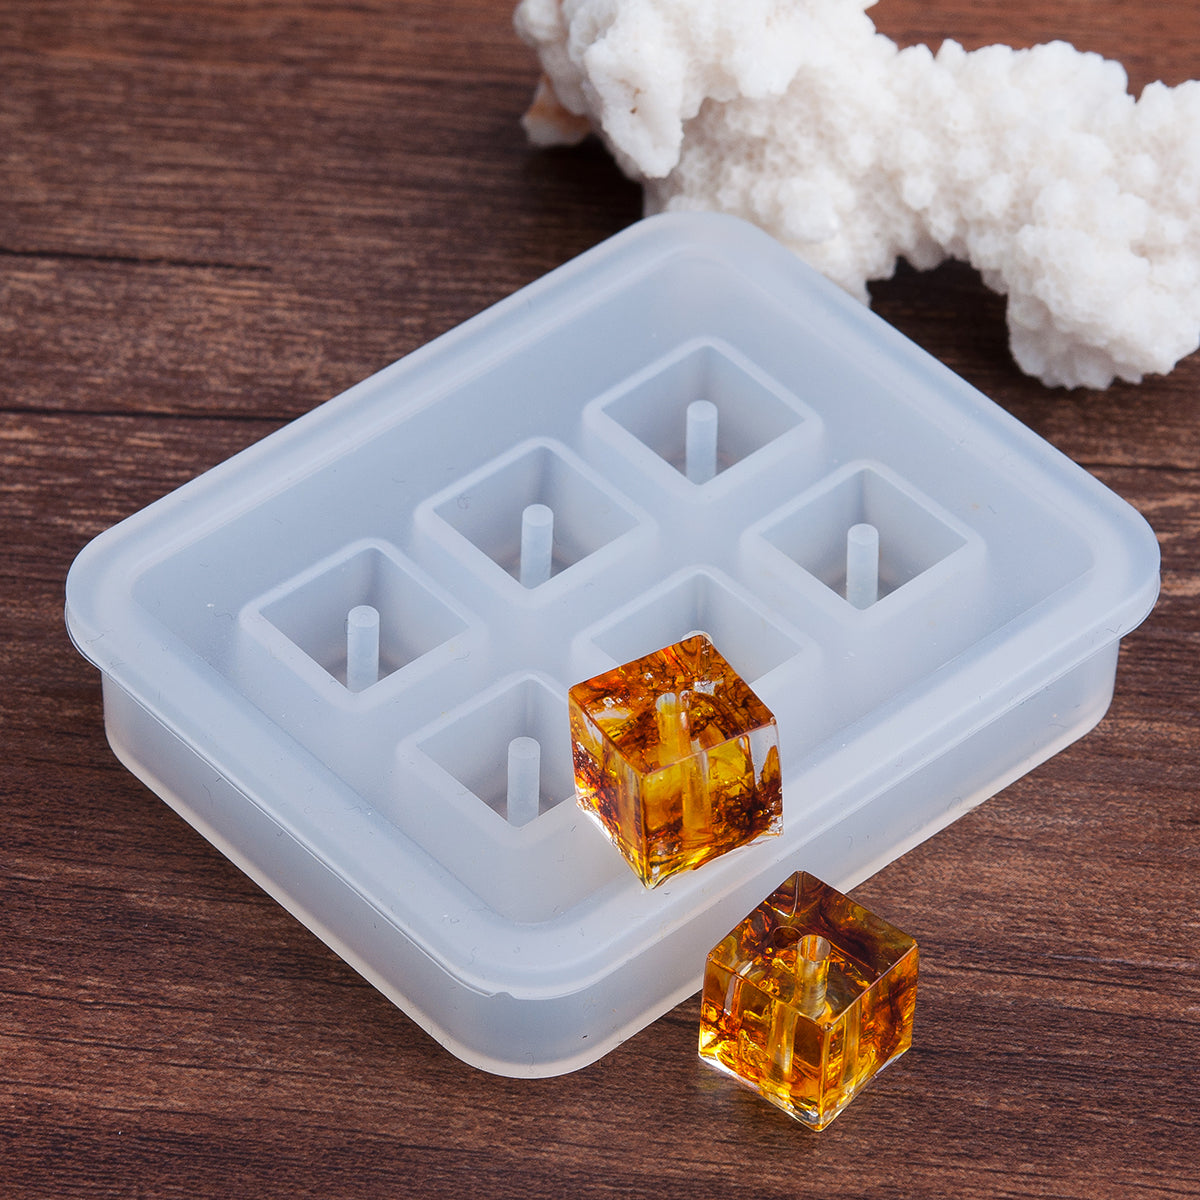 5 RESIN CUBE Molds, Tiny Silicone Molds to make cube 5mm square (3/16